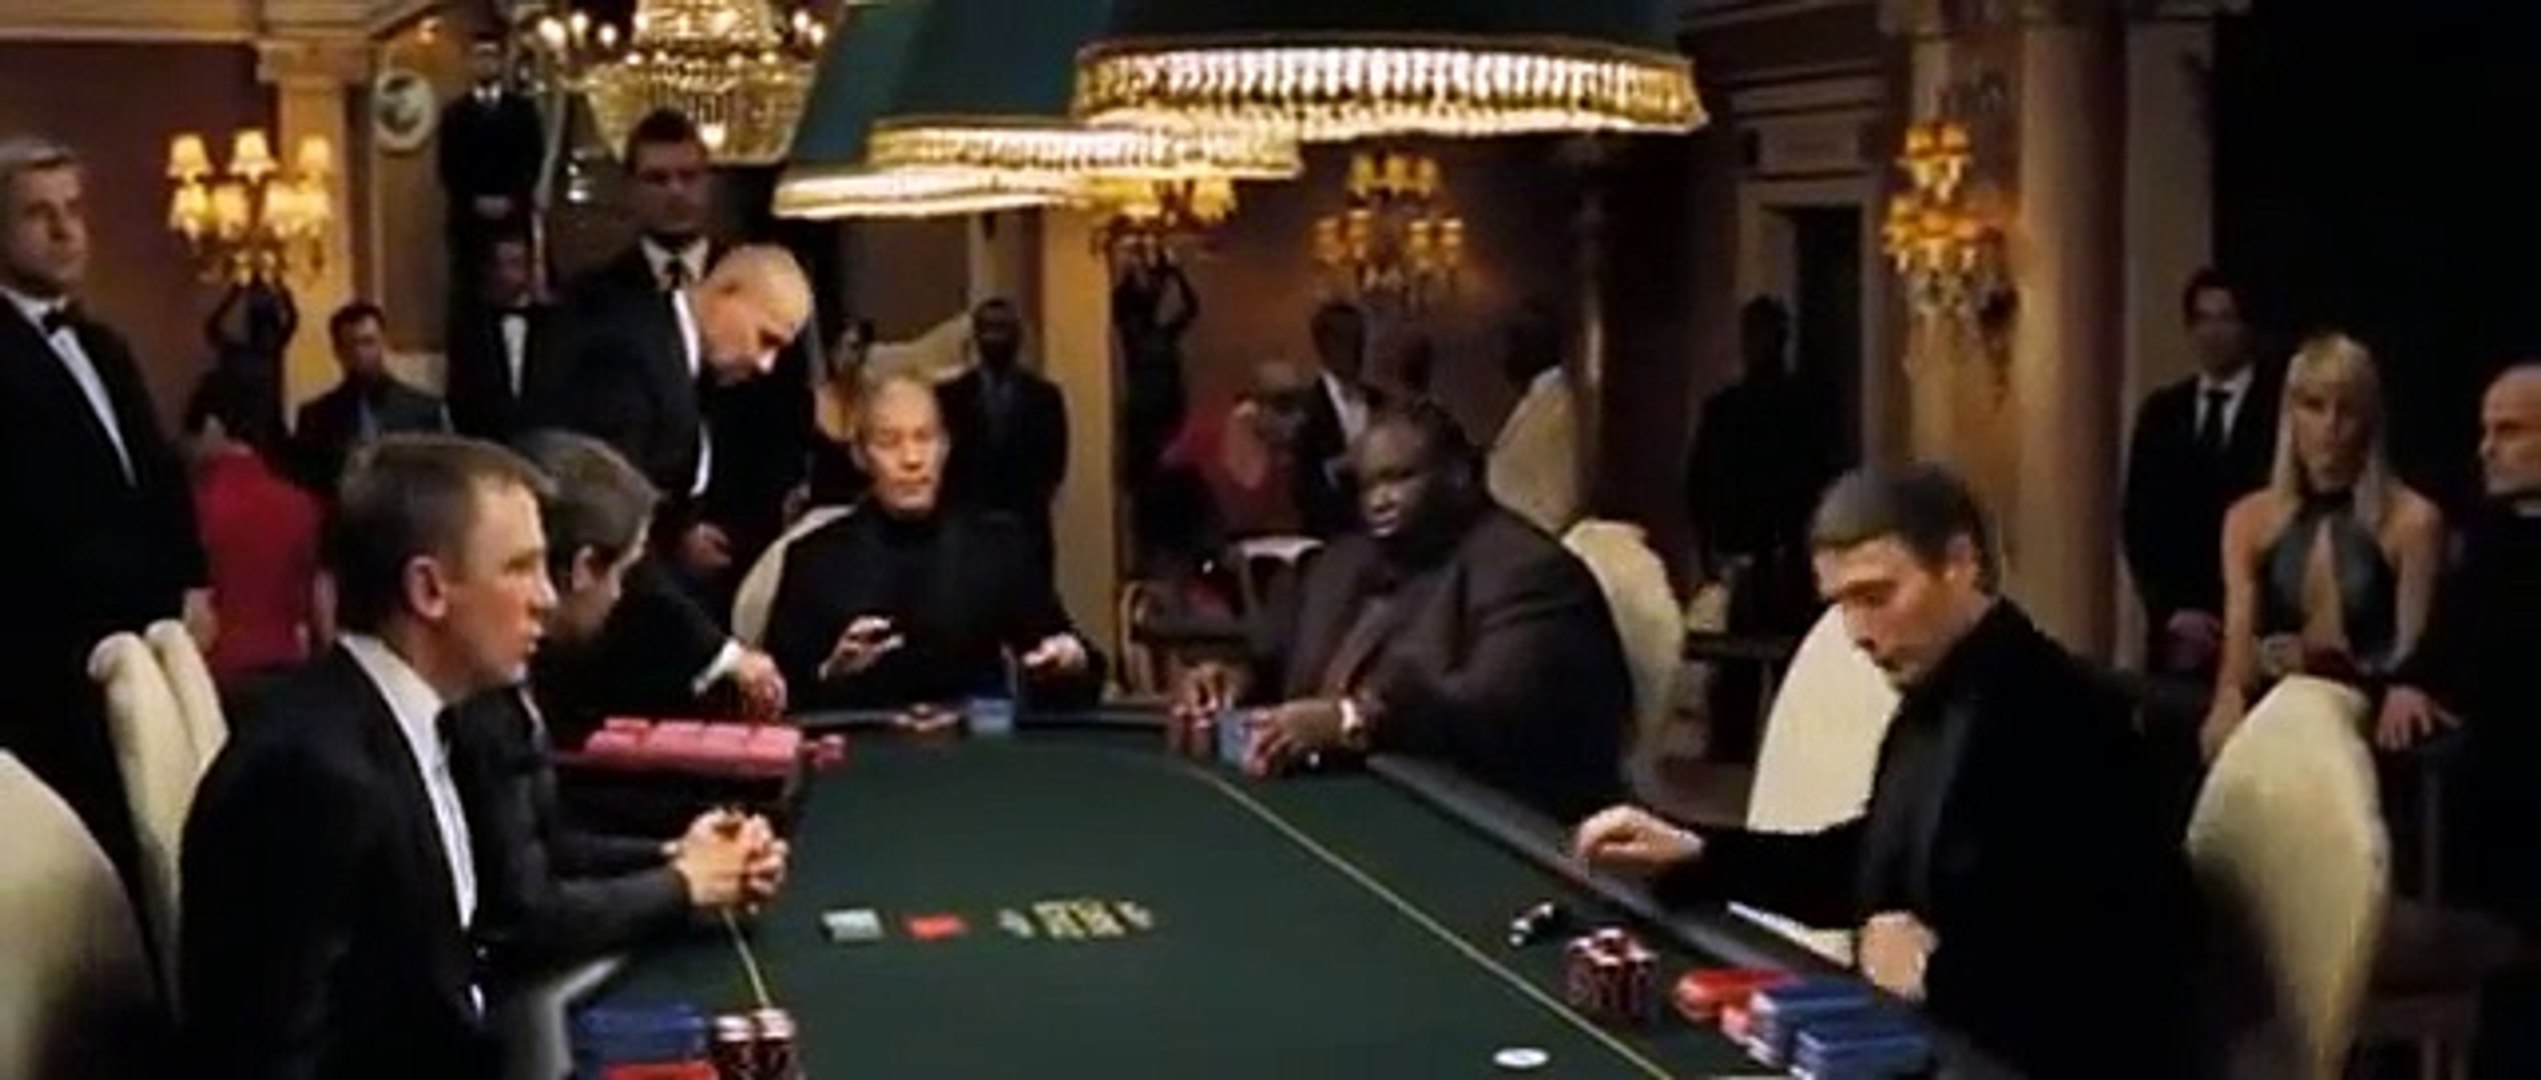 Last poker hand in Casino Royale (2006) - video Dailymotion